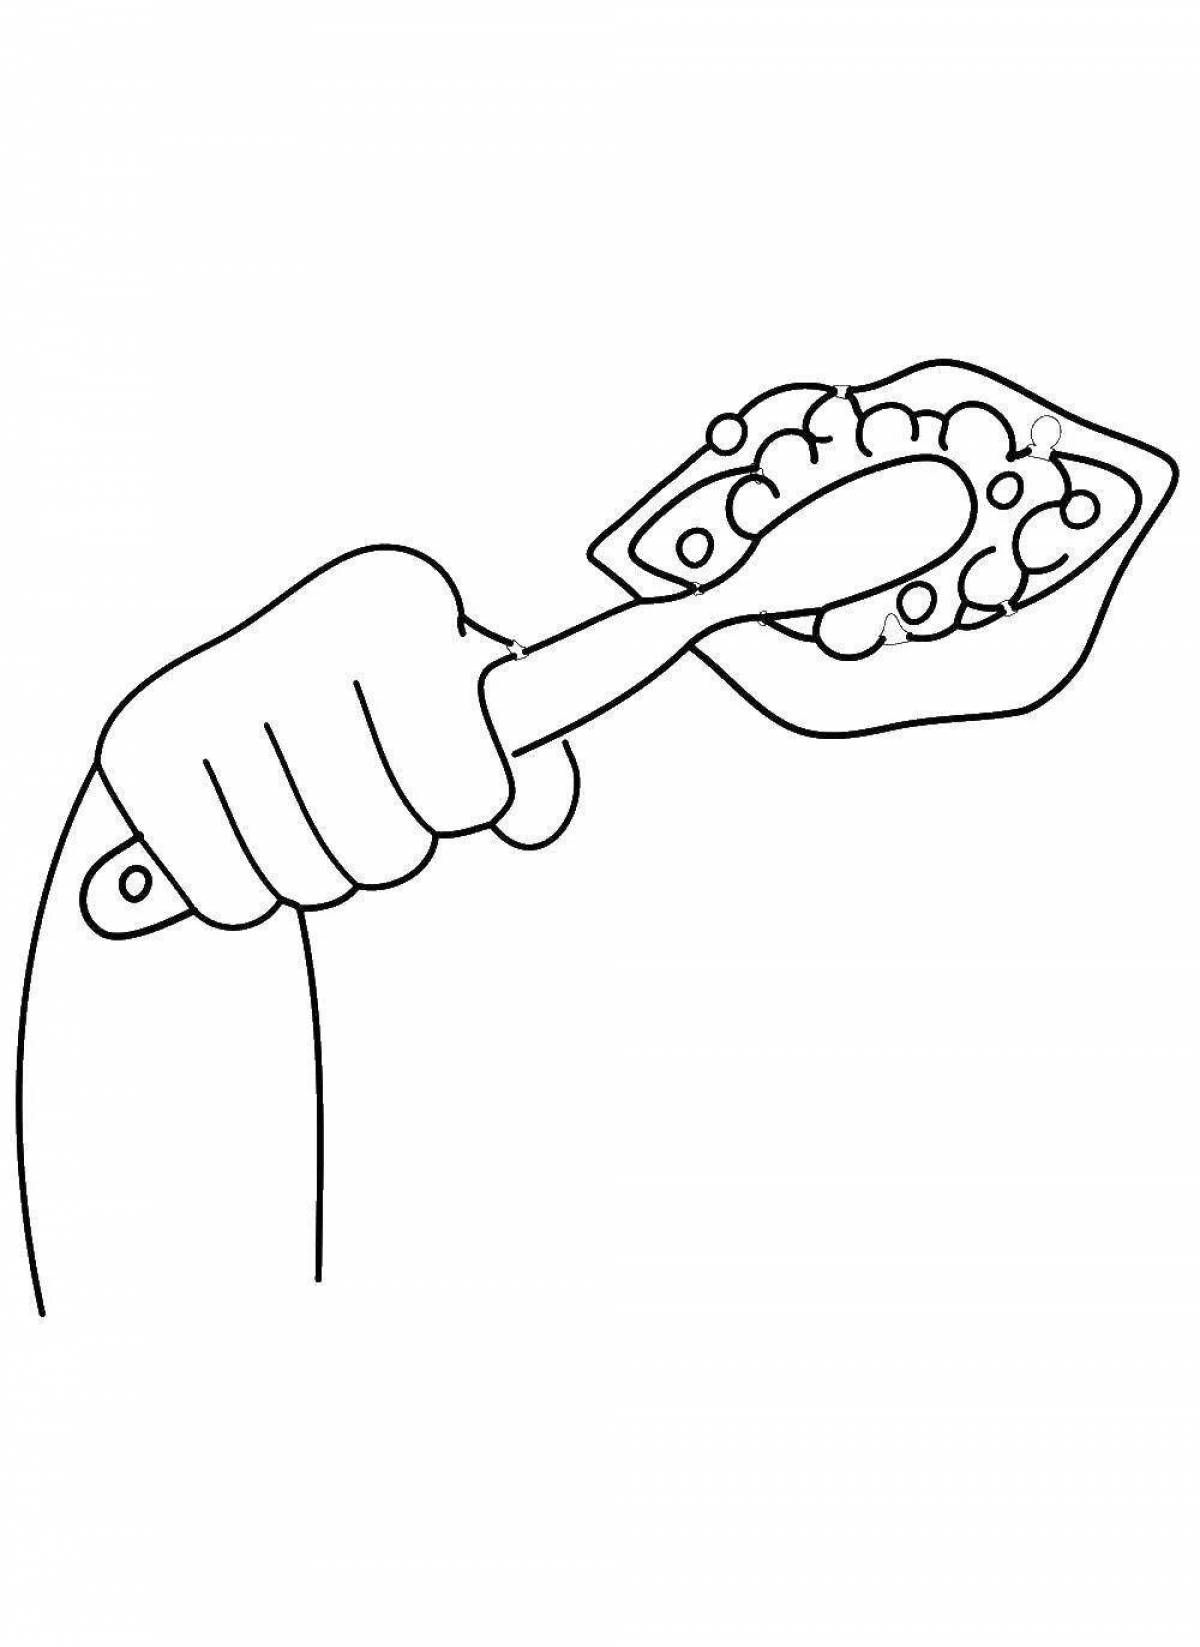 Brush your teeth live coloring page